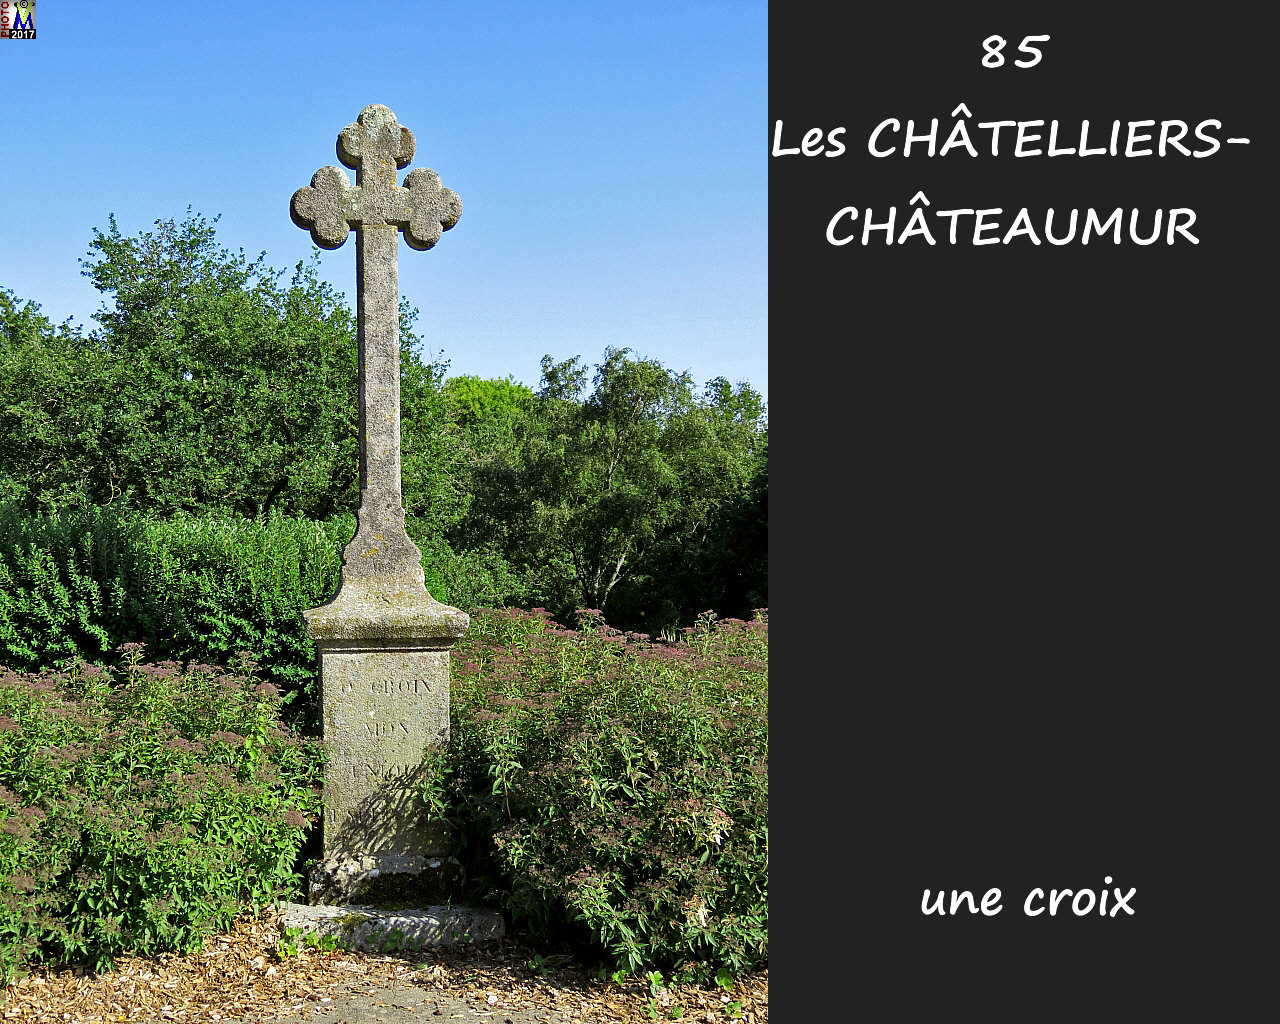 85CHATELLIERS-CHATEAUMUR_croix_1010.jpg